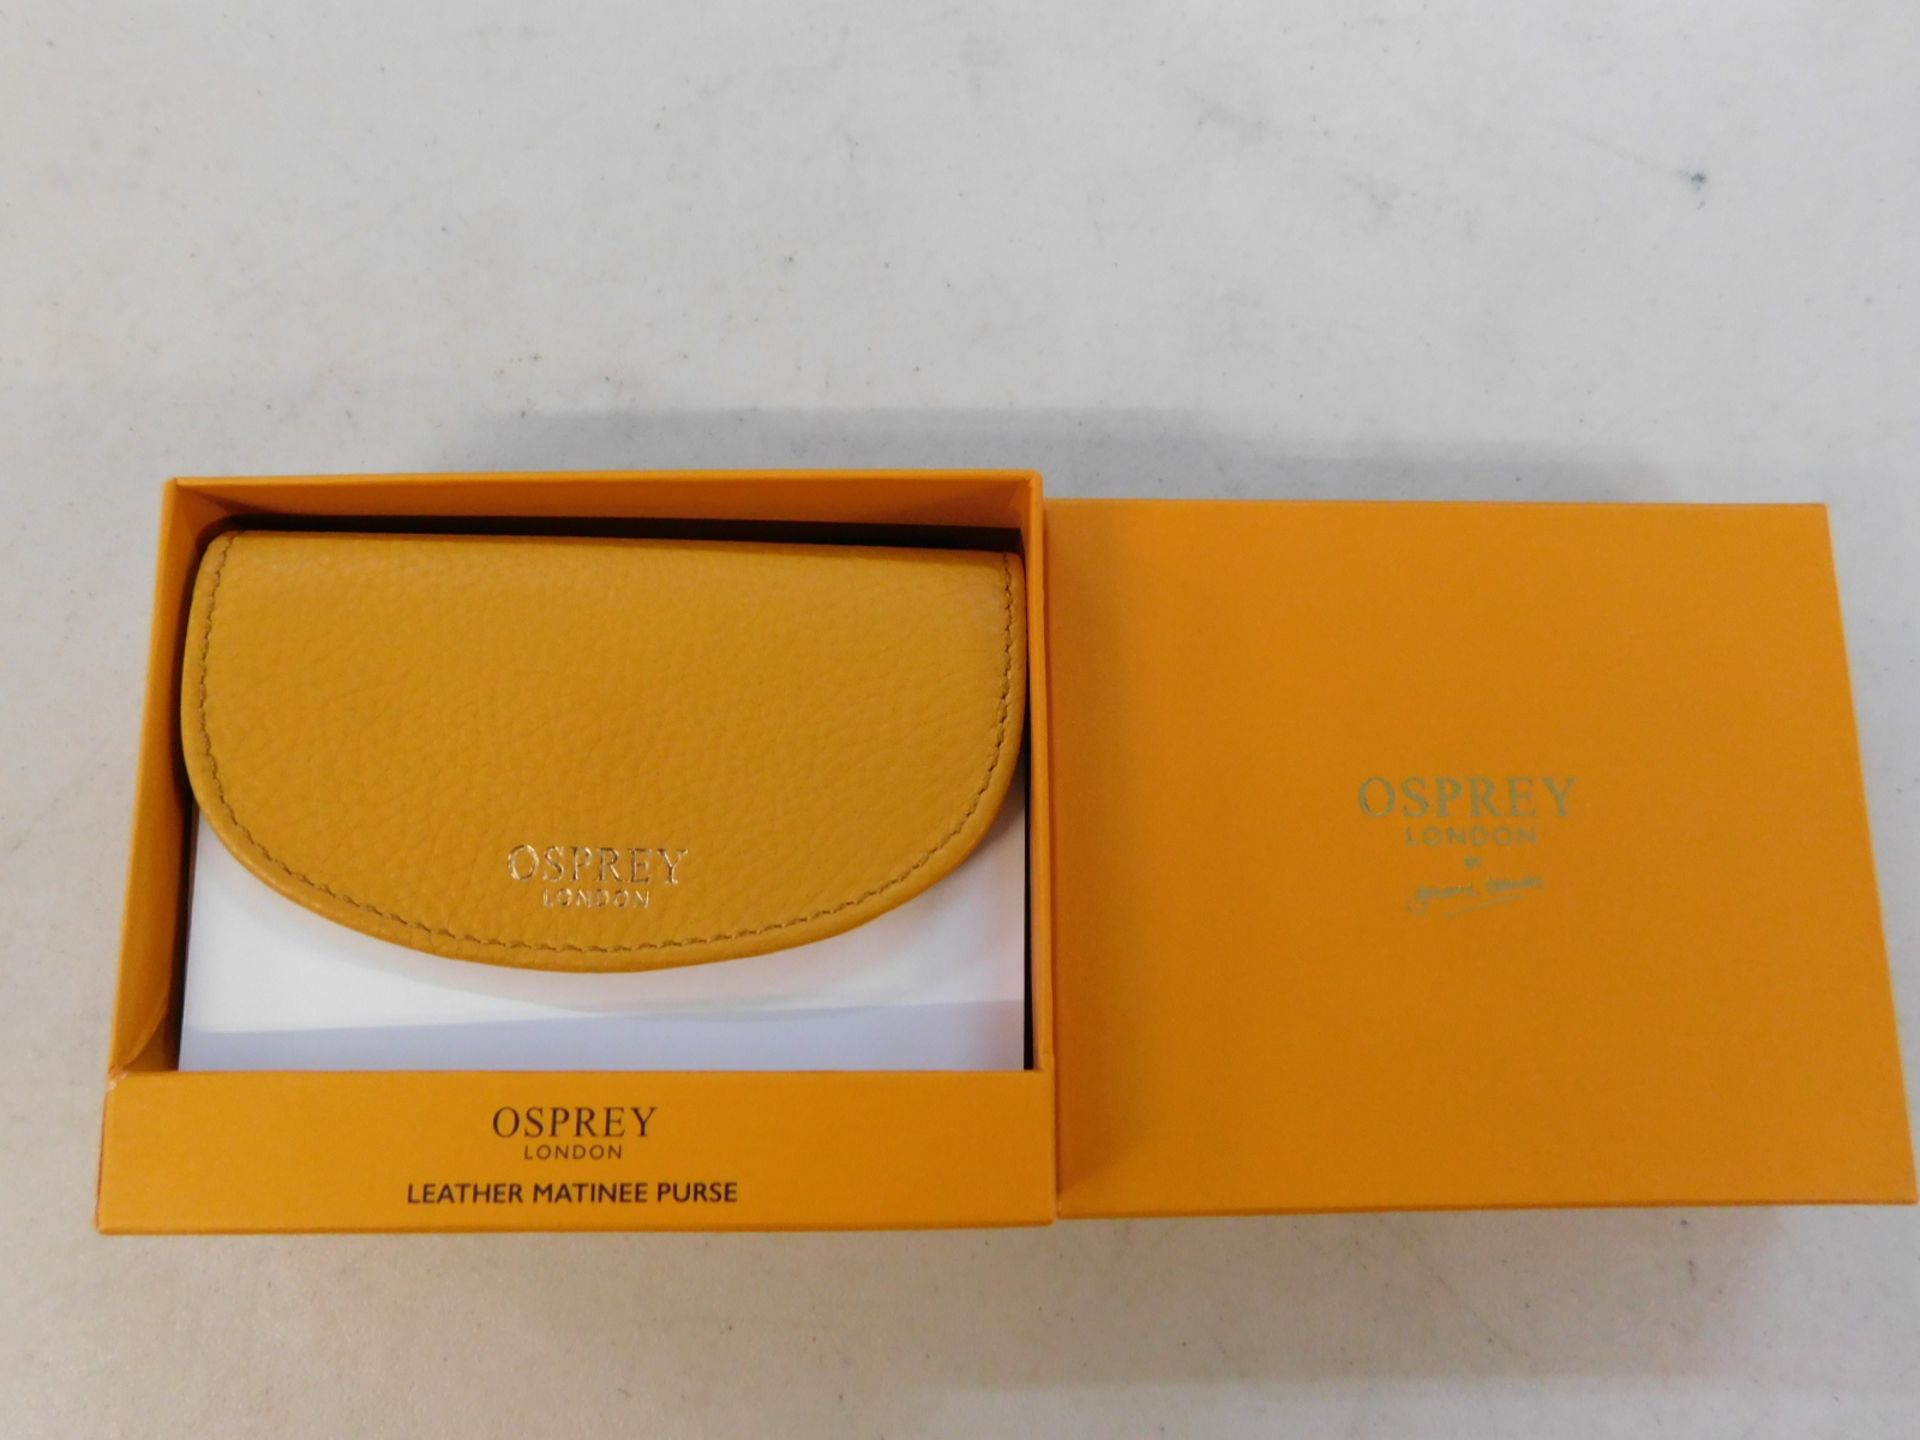 1 BOXED OSPREY MENS LEATHER MATINEE PURSE RRP Â£34.99